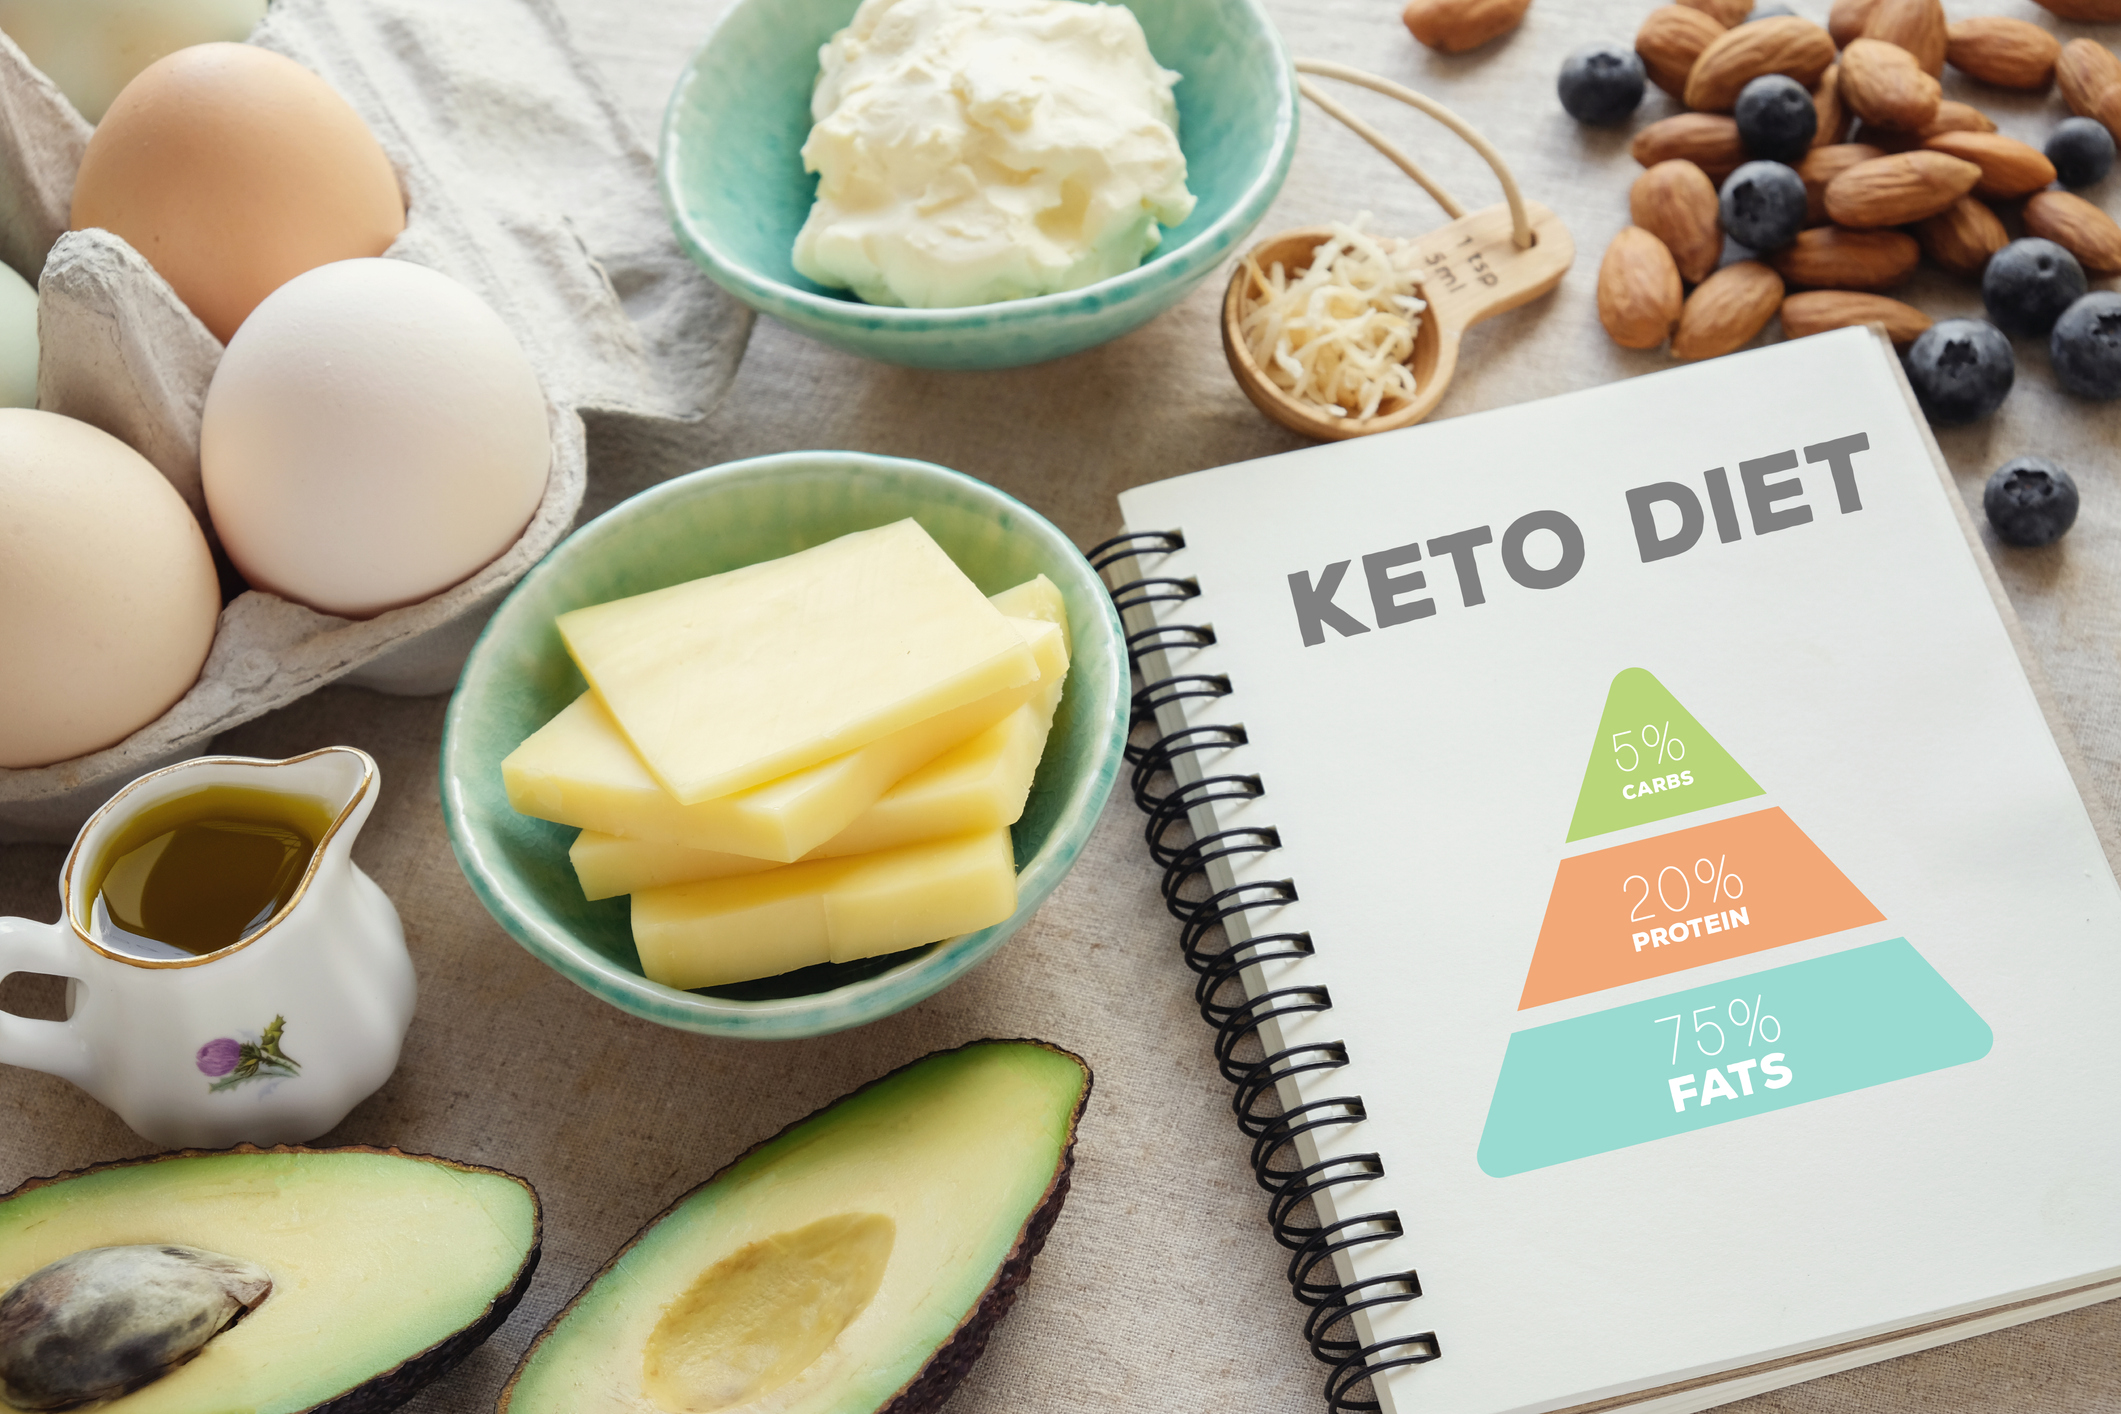 Keto diet could damage liver health, say experts